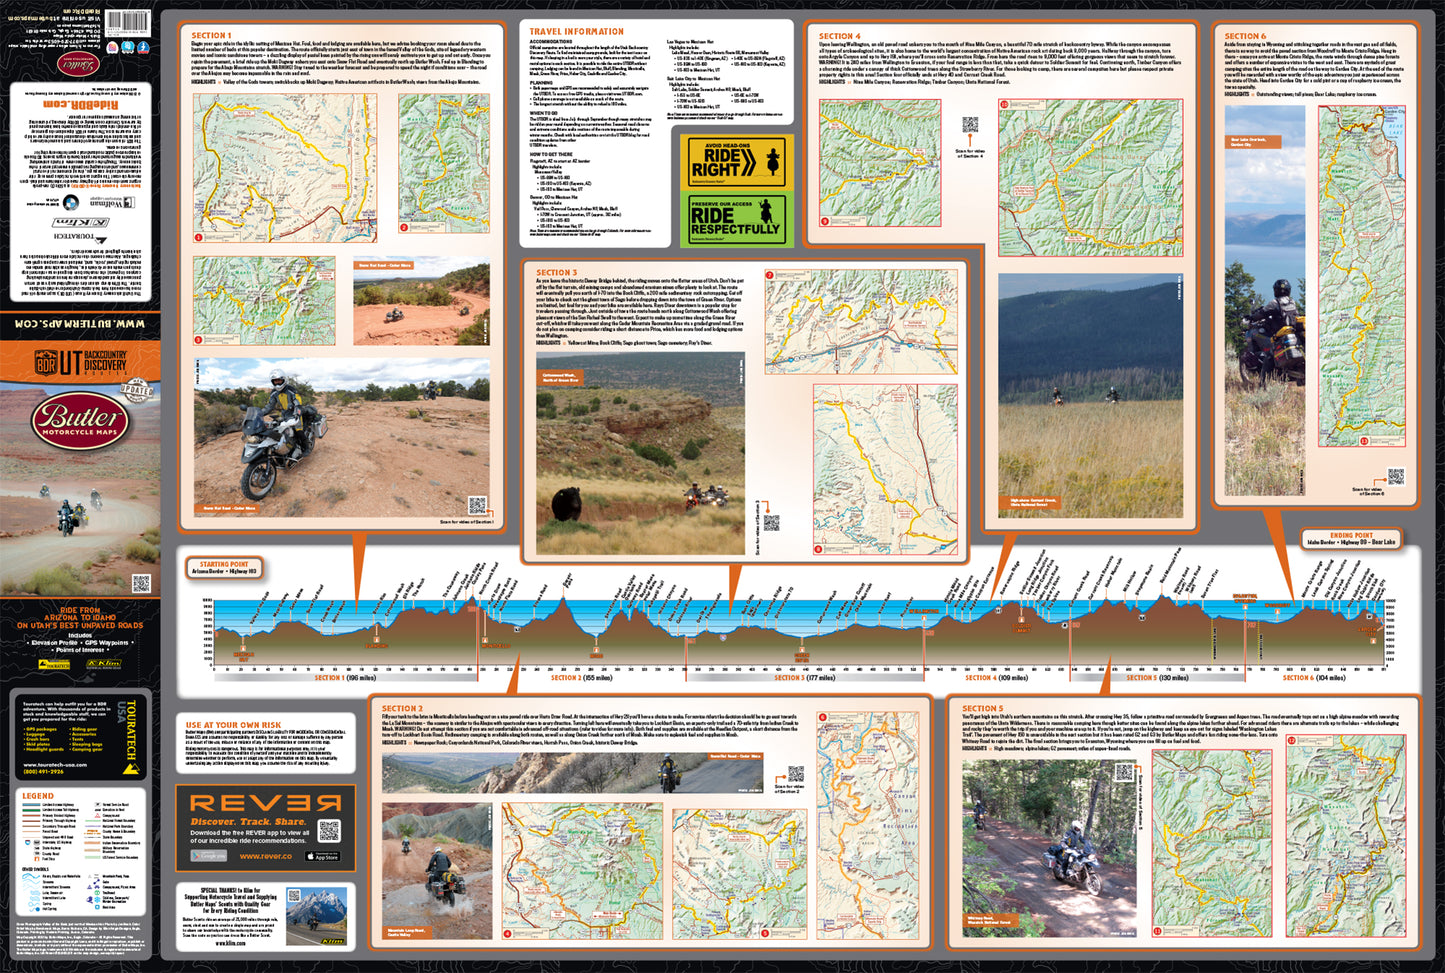 Utah Backcountry Discovery Route (UTBDR) Map 2nd Edition